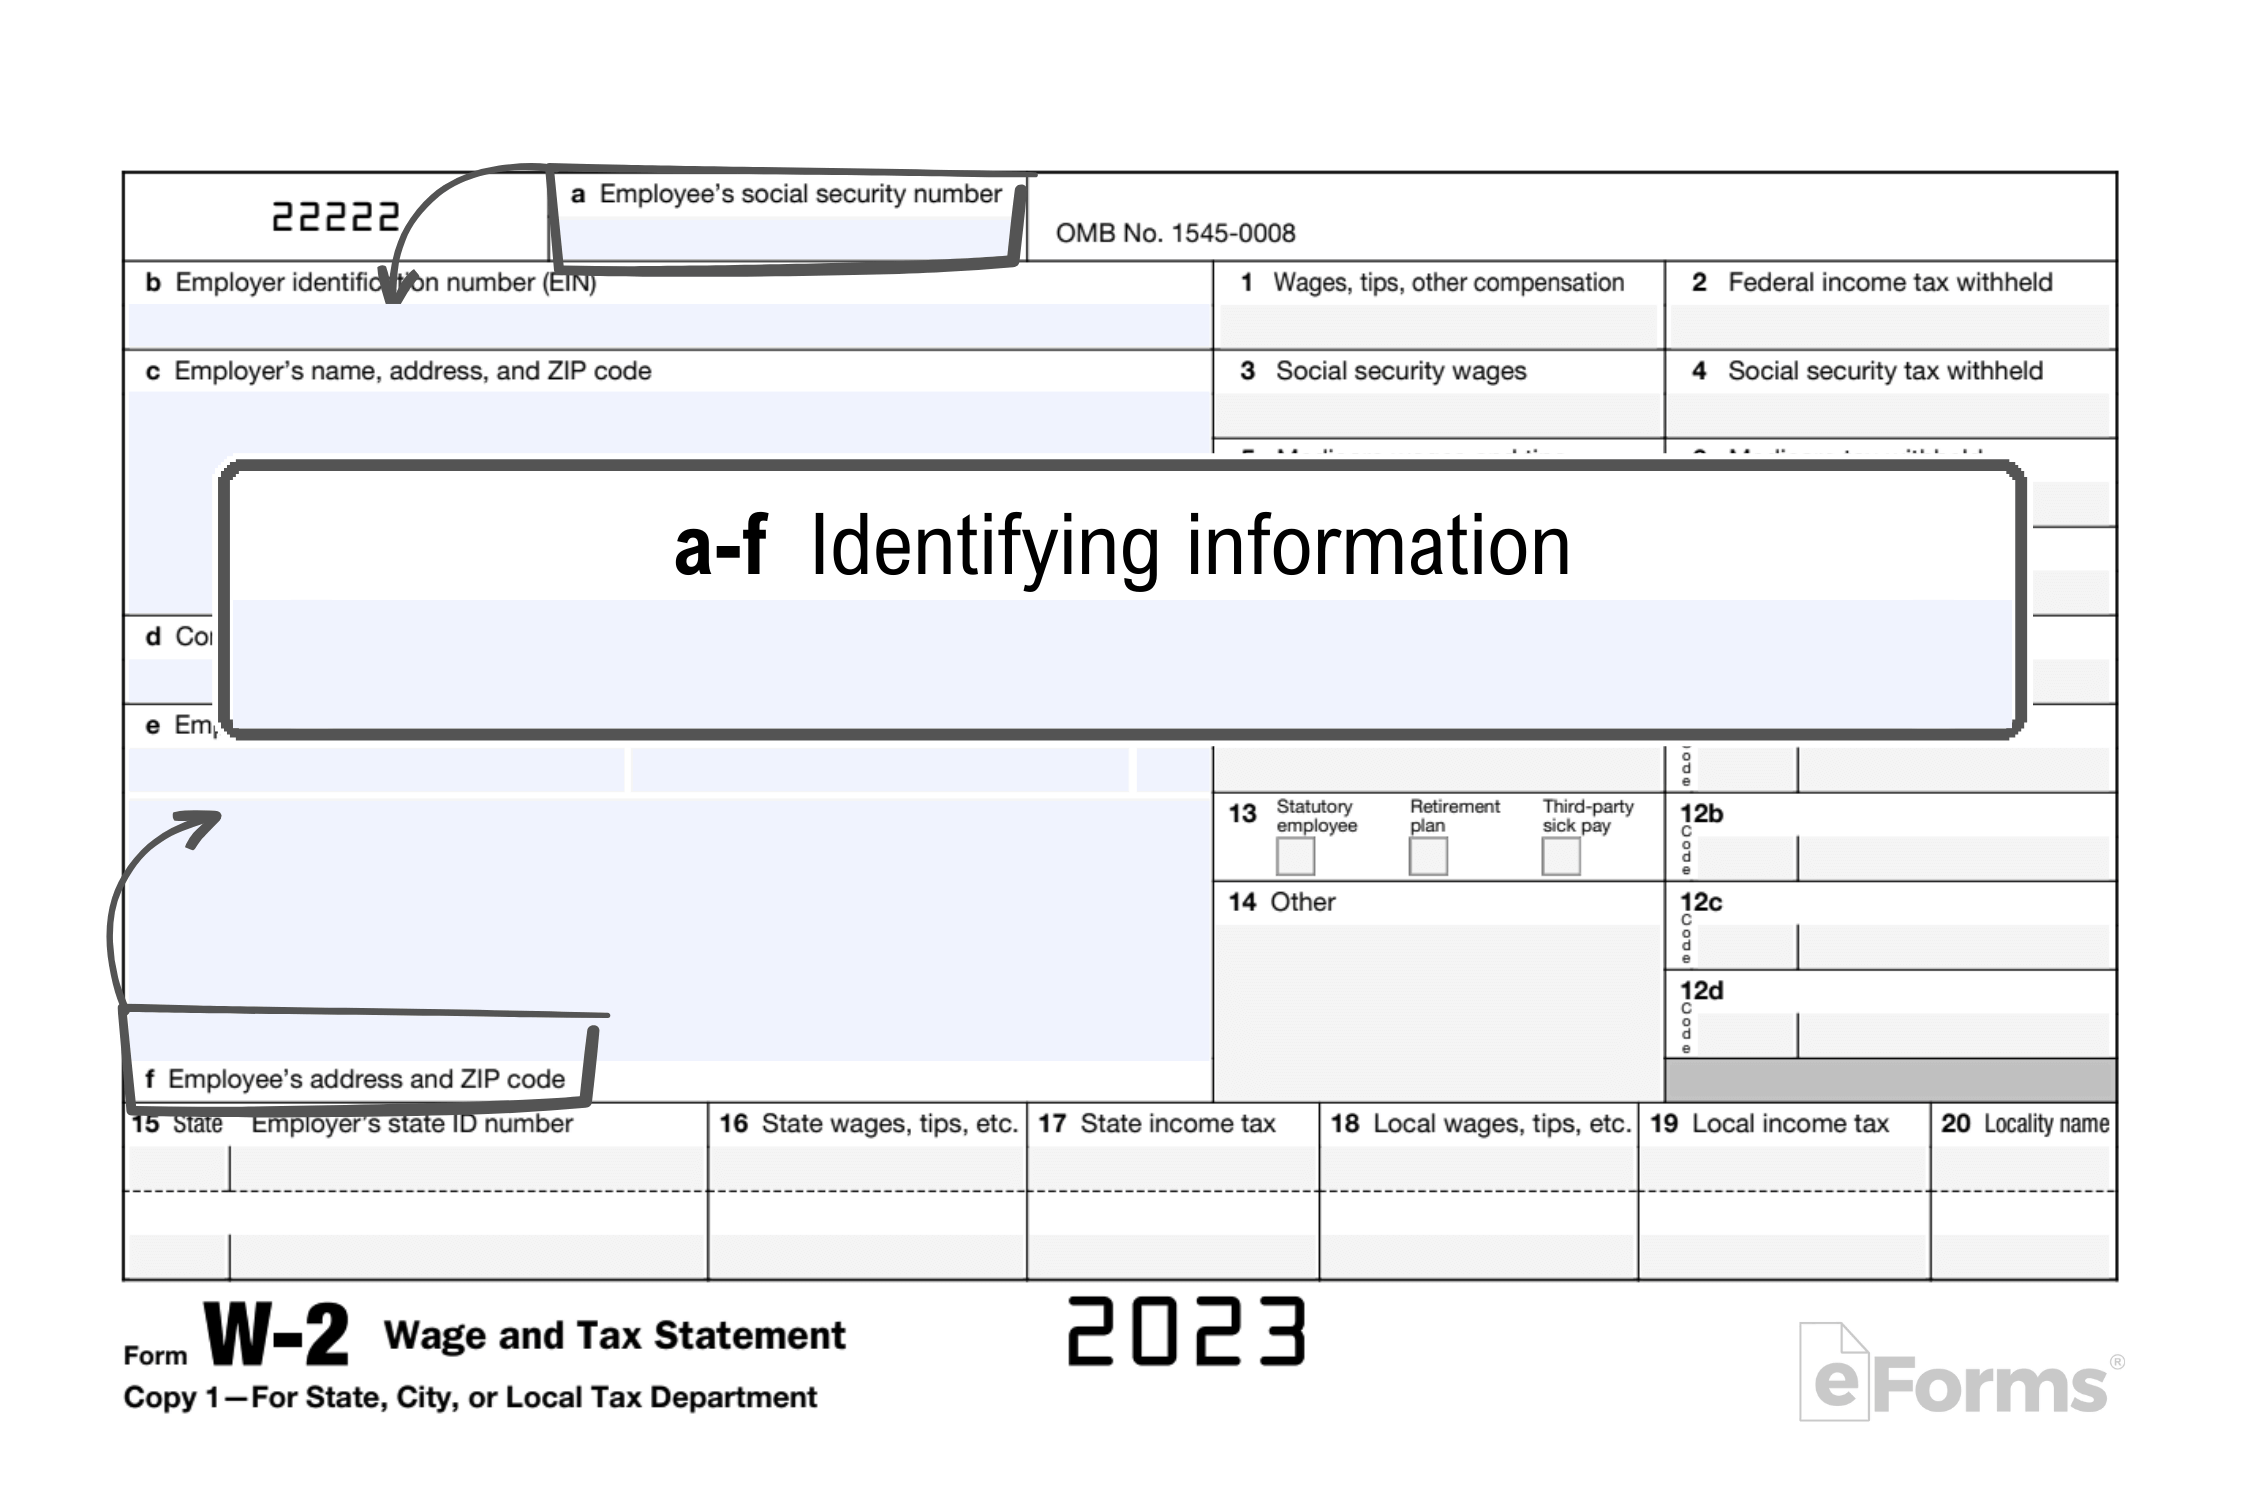 Free Irs Form W-2 | Wage And Tax Statement - Pdf – Eforms throughout W2 Form Box 2